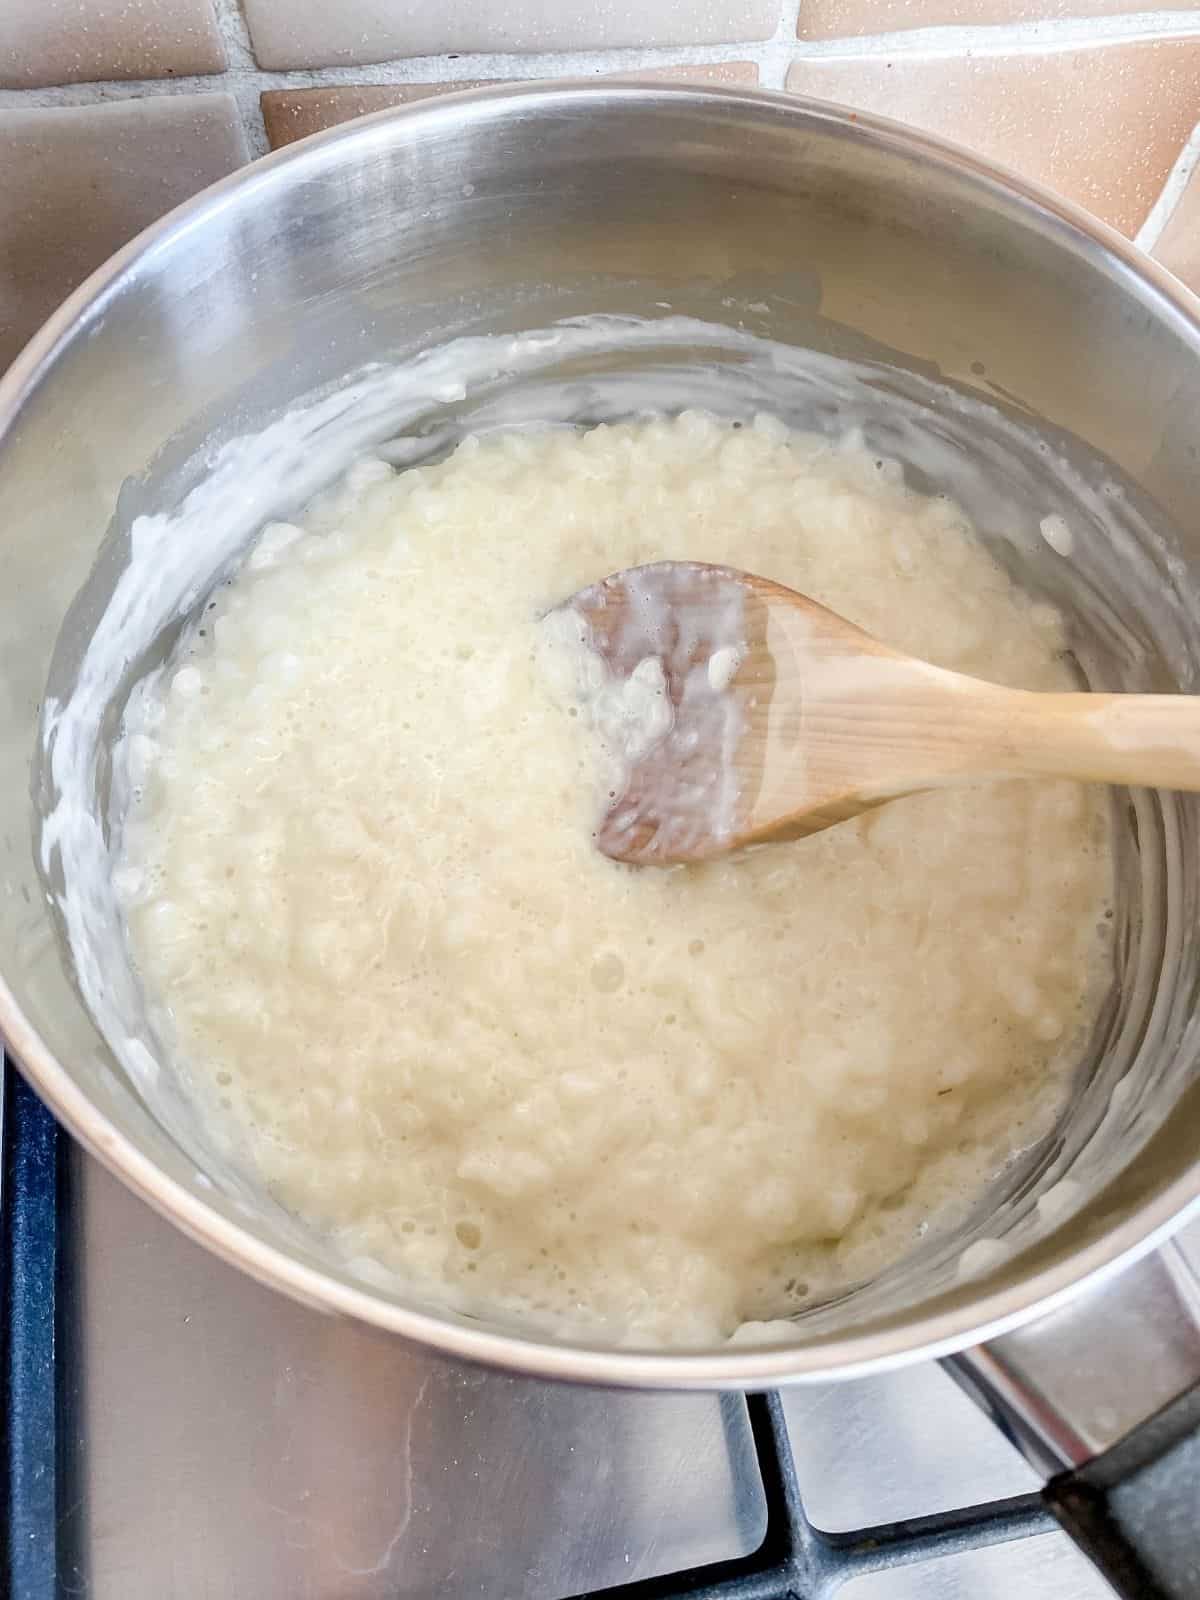 rice pudding in a pan being stirred with a wooden spoon.